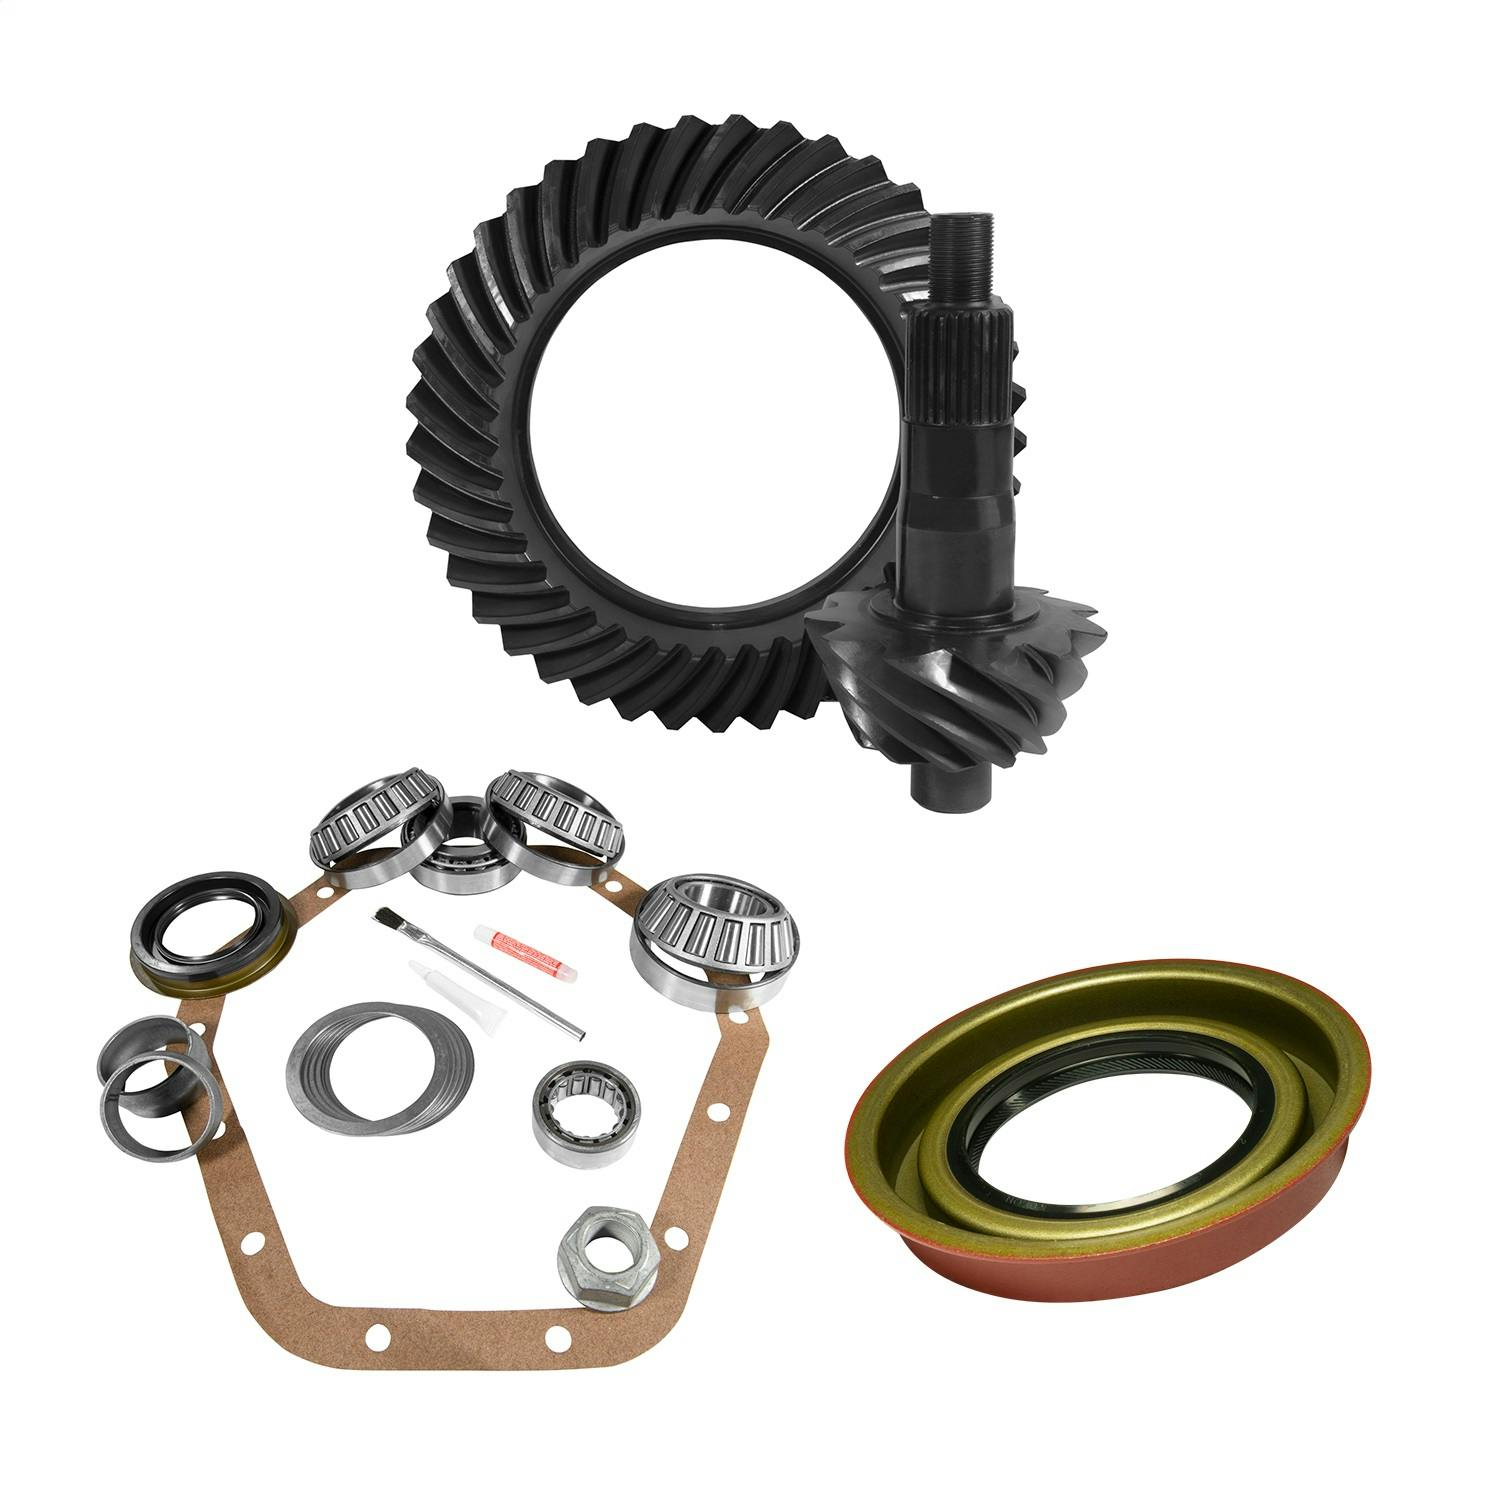 USA Standard Gear ZGK2123 10.5in. GM 14 Bolt 5.13 Thick Rear Ring/Pinion and Install Kit